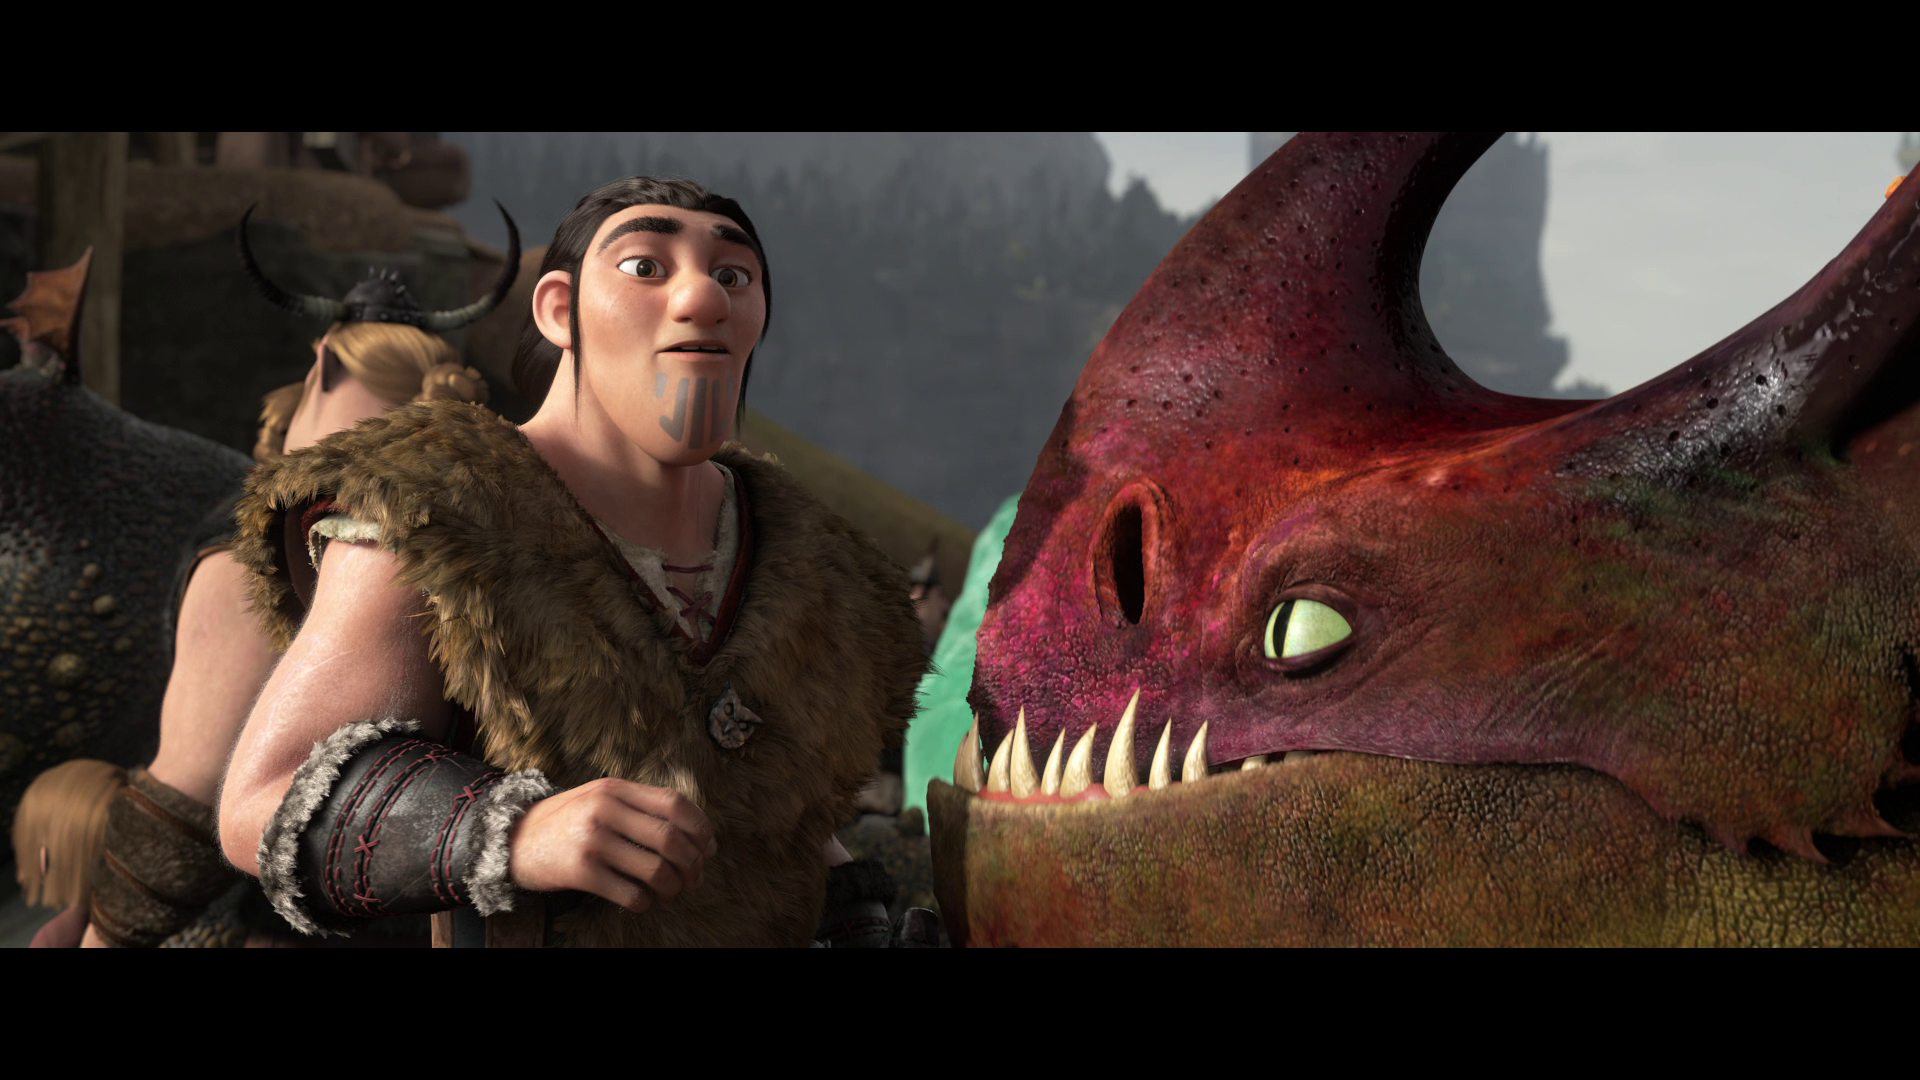 How To Train Your Dragon Soundtrack by John Powell